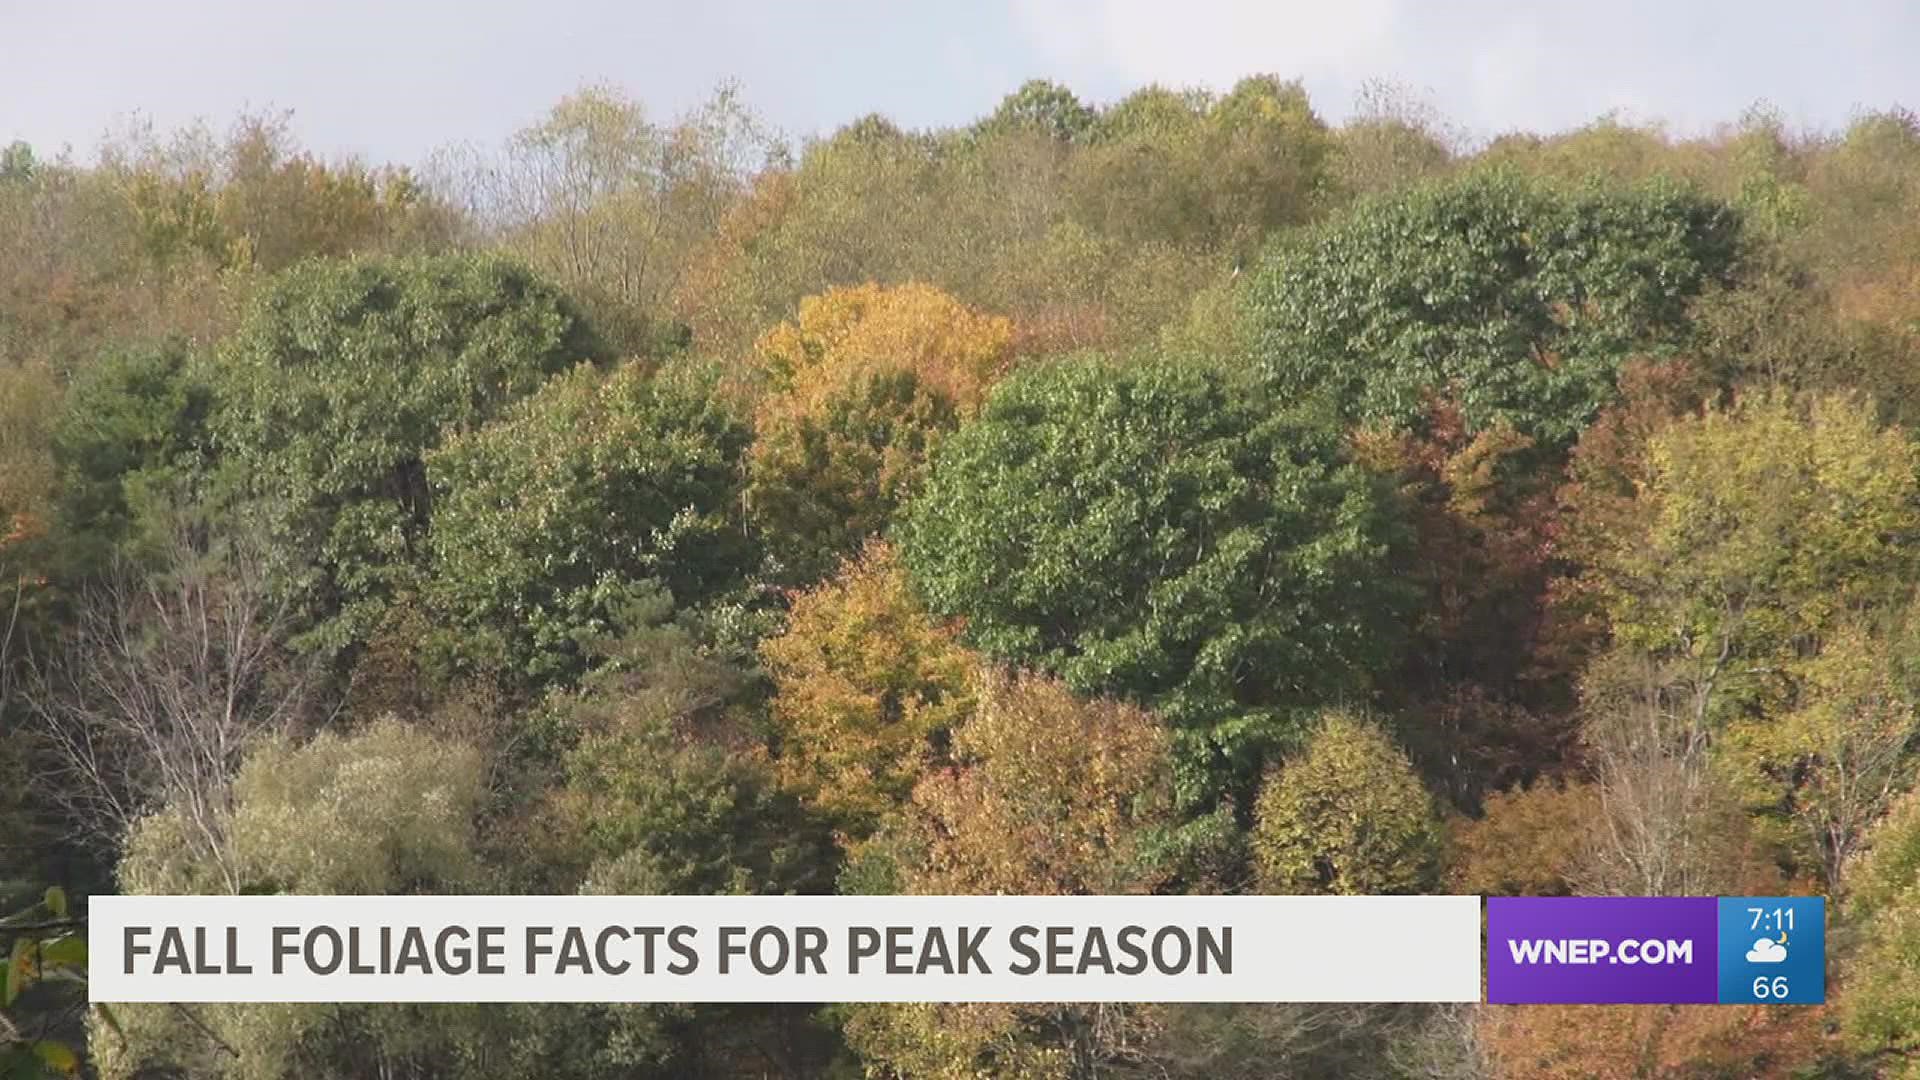 Newswatch 16's Courtney Harrison spoke with an expert who explains what factors can affect the fall colors.